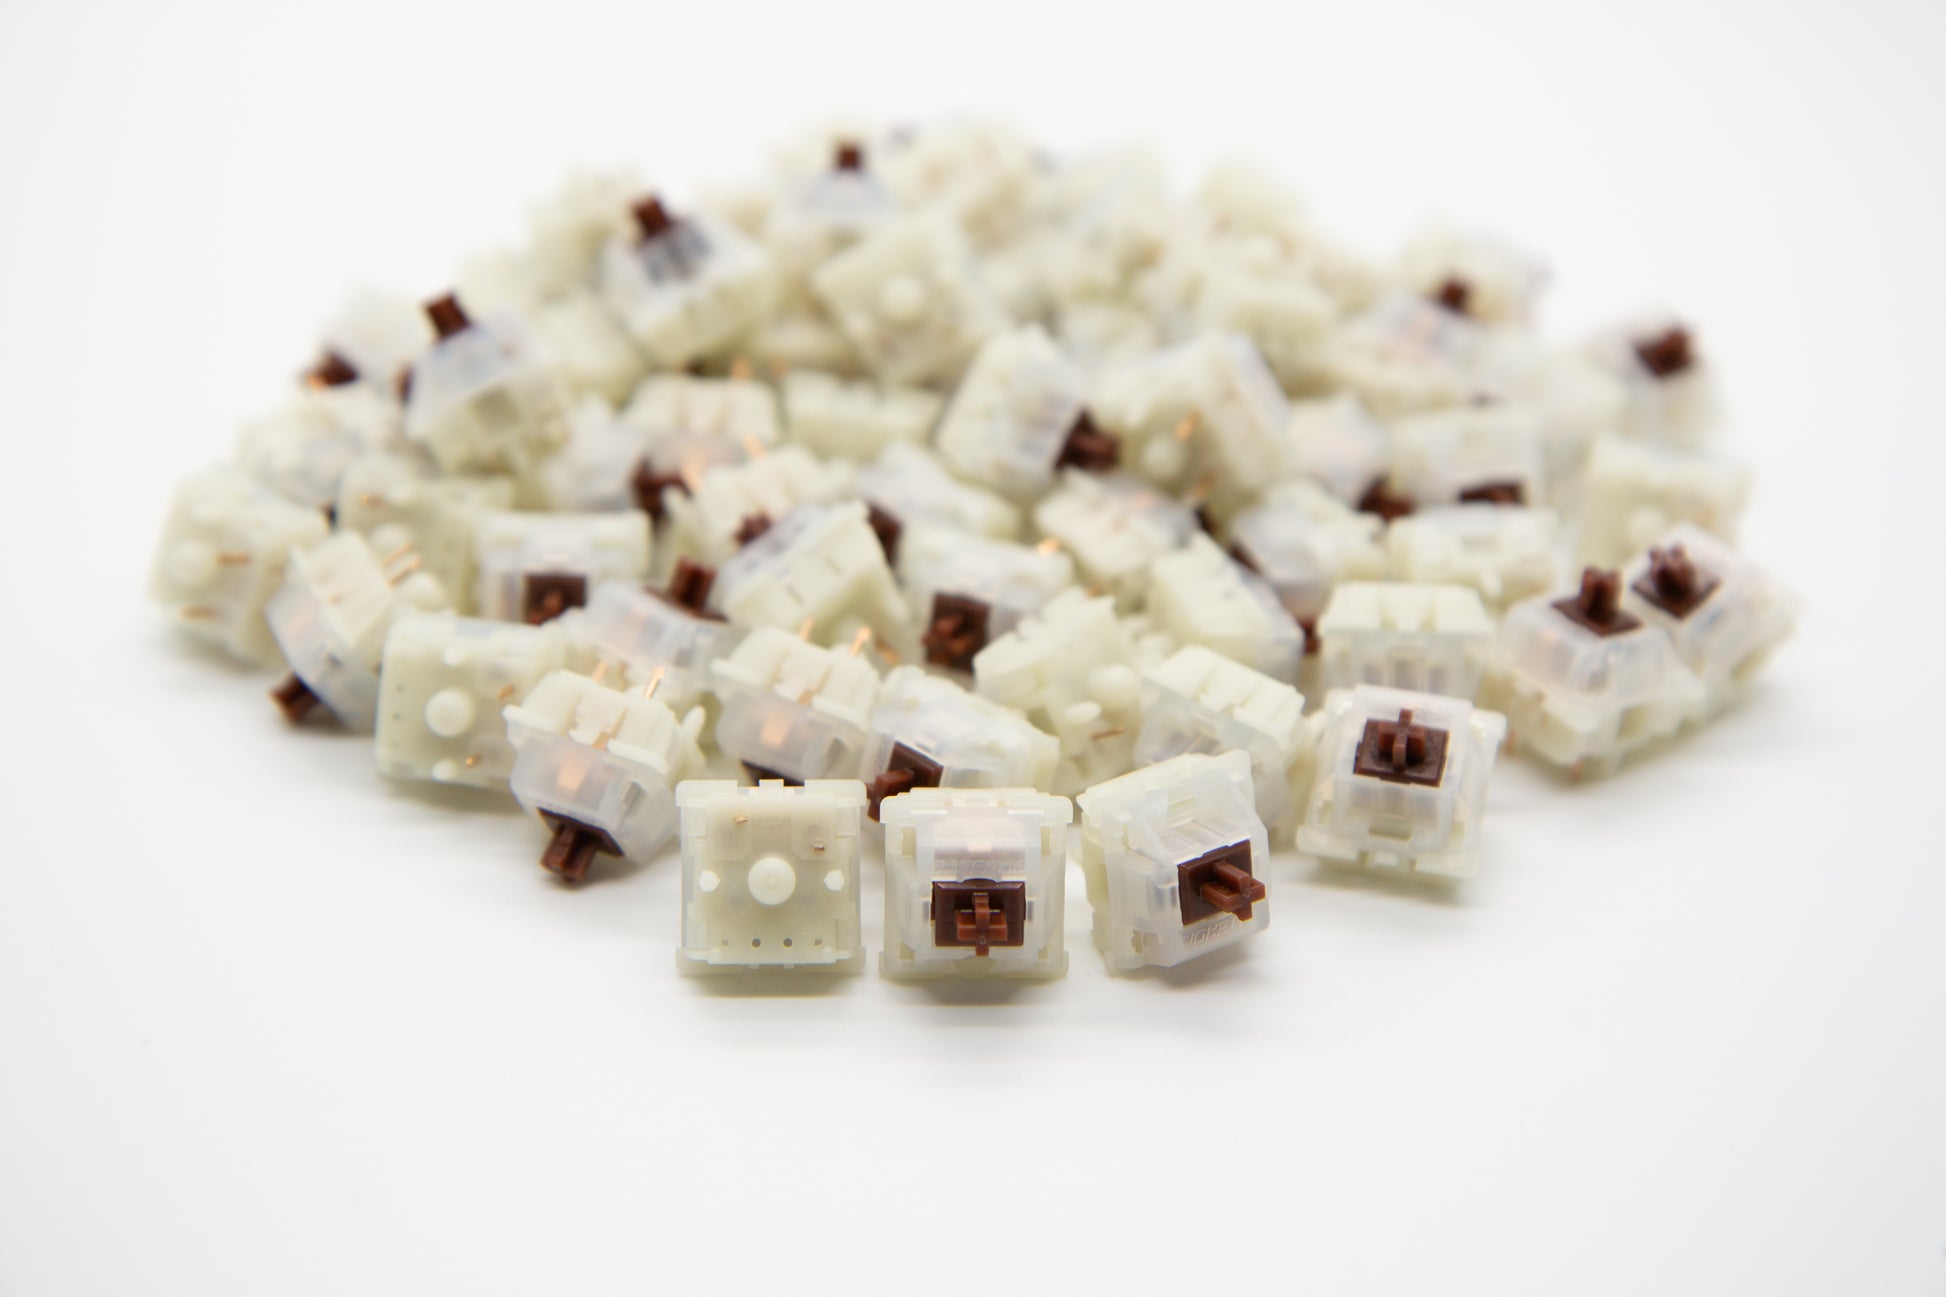 Close-up shot of a pile of Gateron Milky Brown mechanical keyboard switches featuring white housing and brown stems